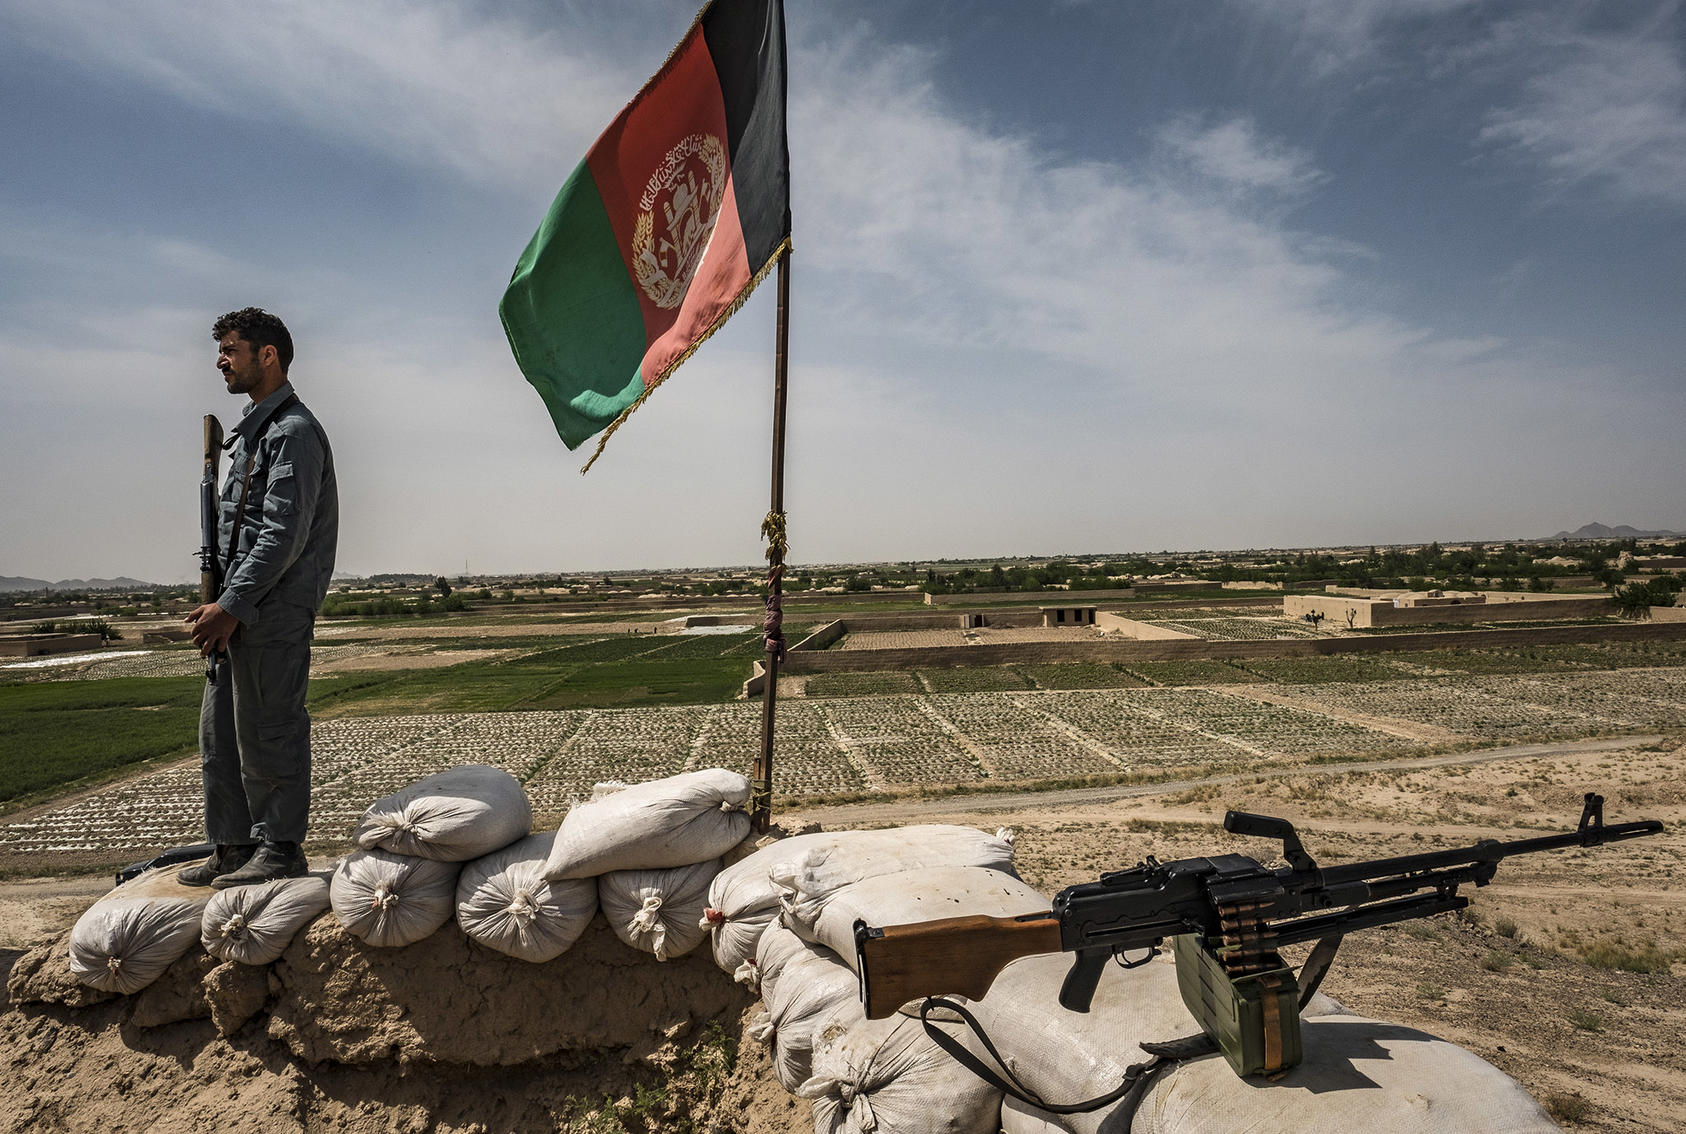 A police outpost north of Farah, Afghanistan, April 13, 2017. (Bryan Denton/The New York Times)